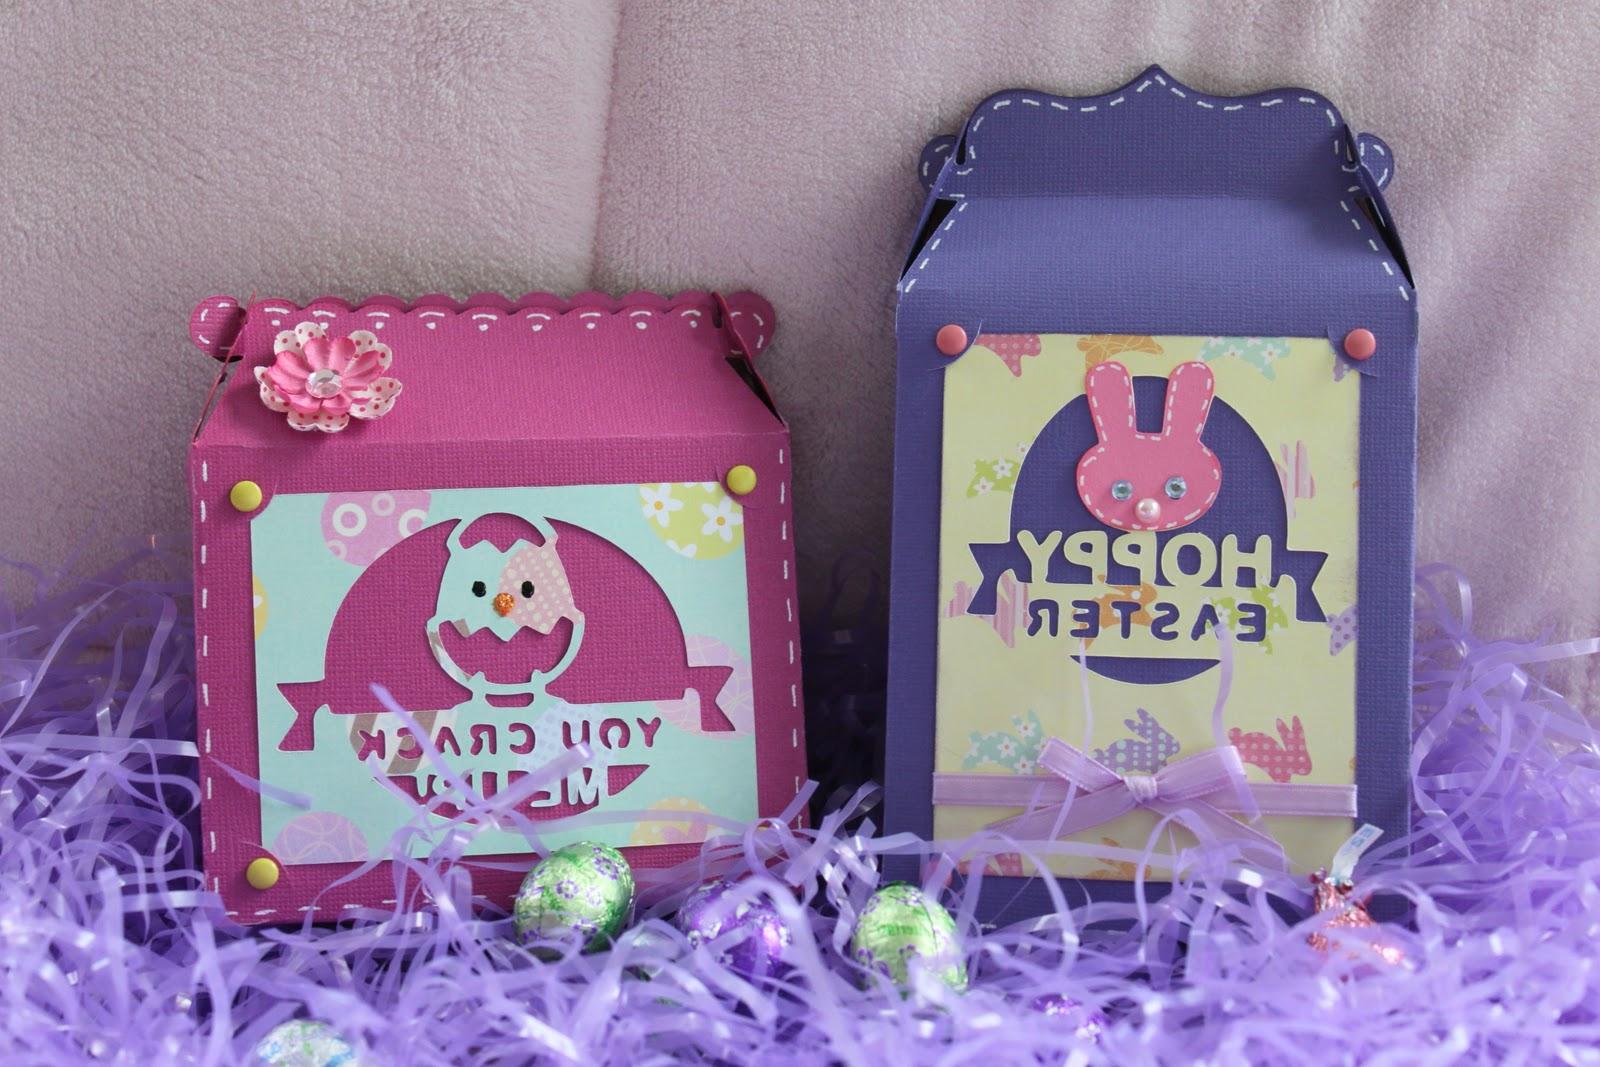 wedding candy boxes